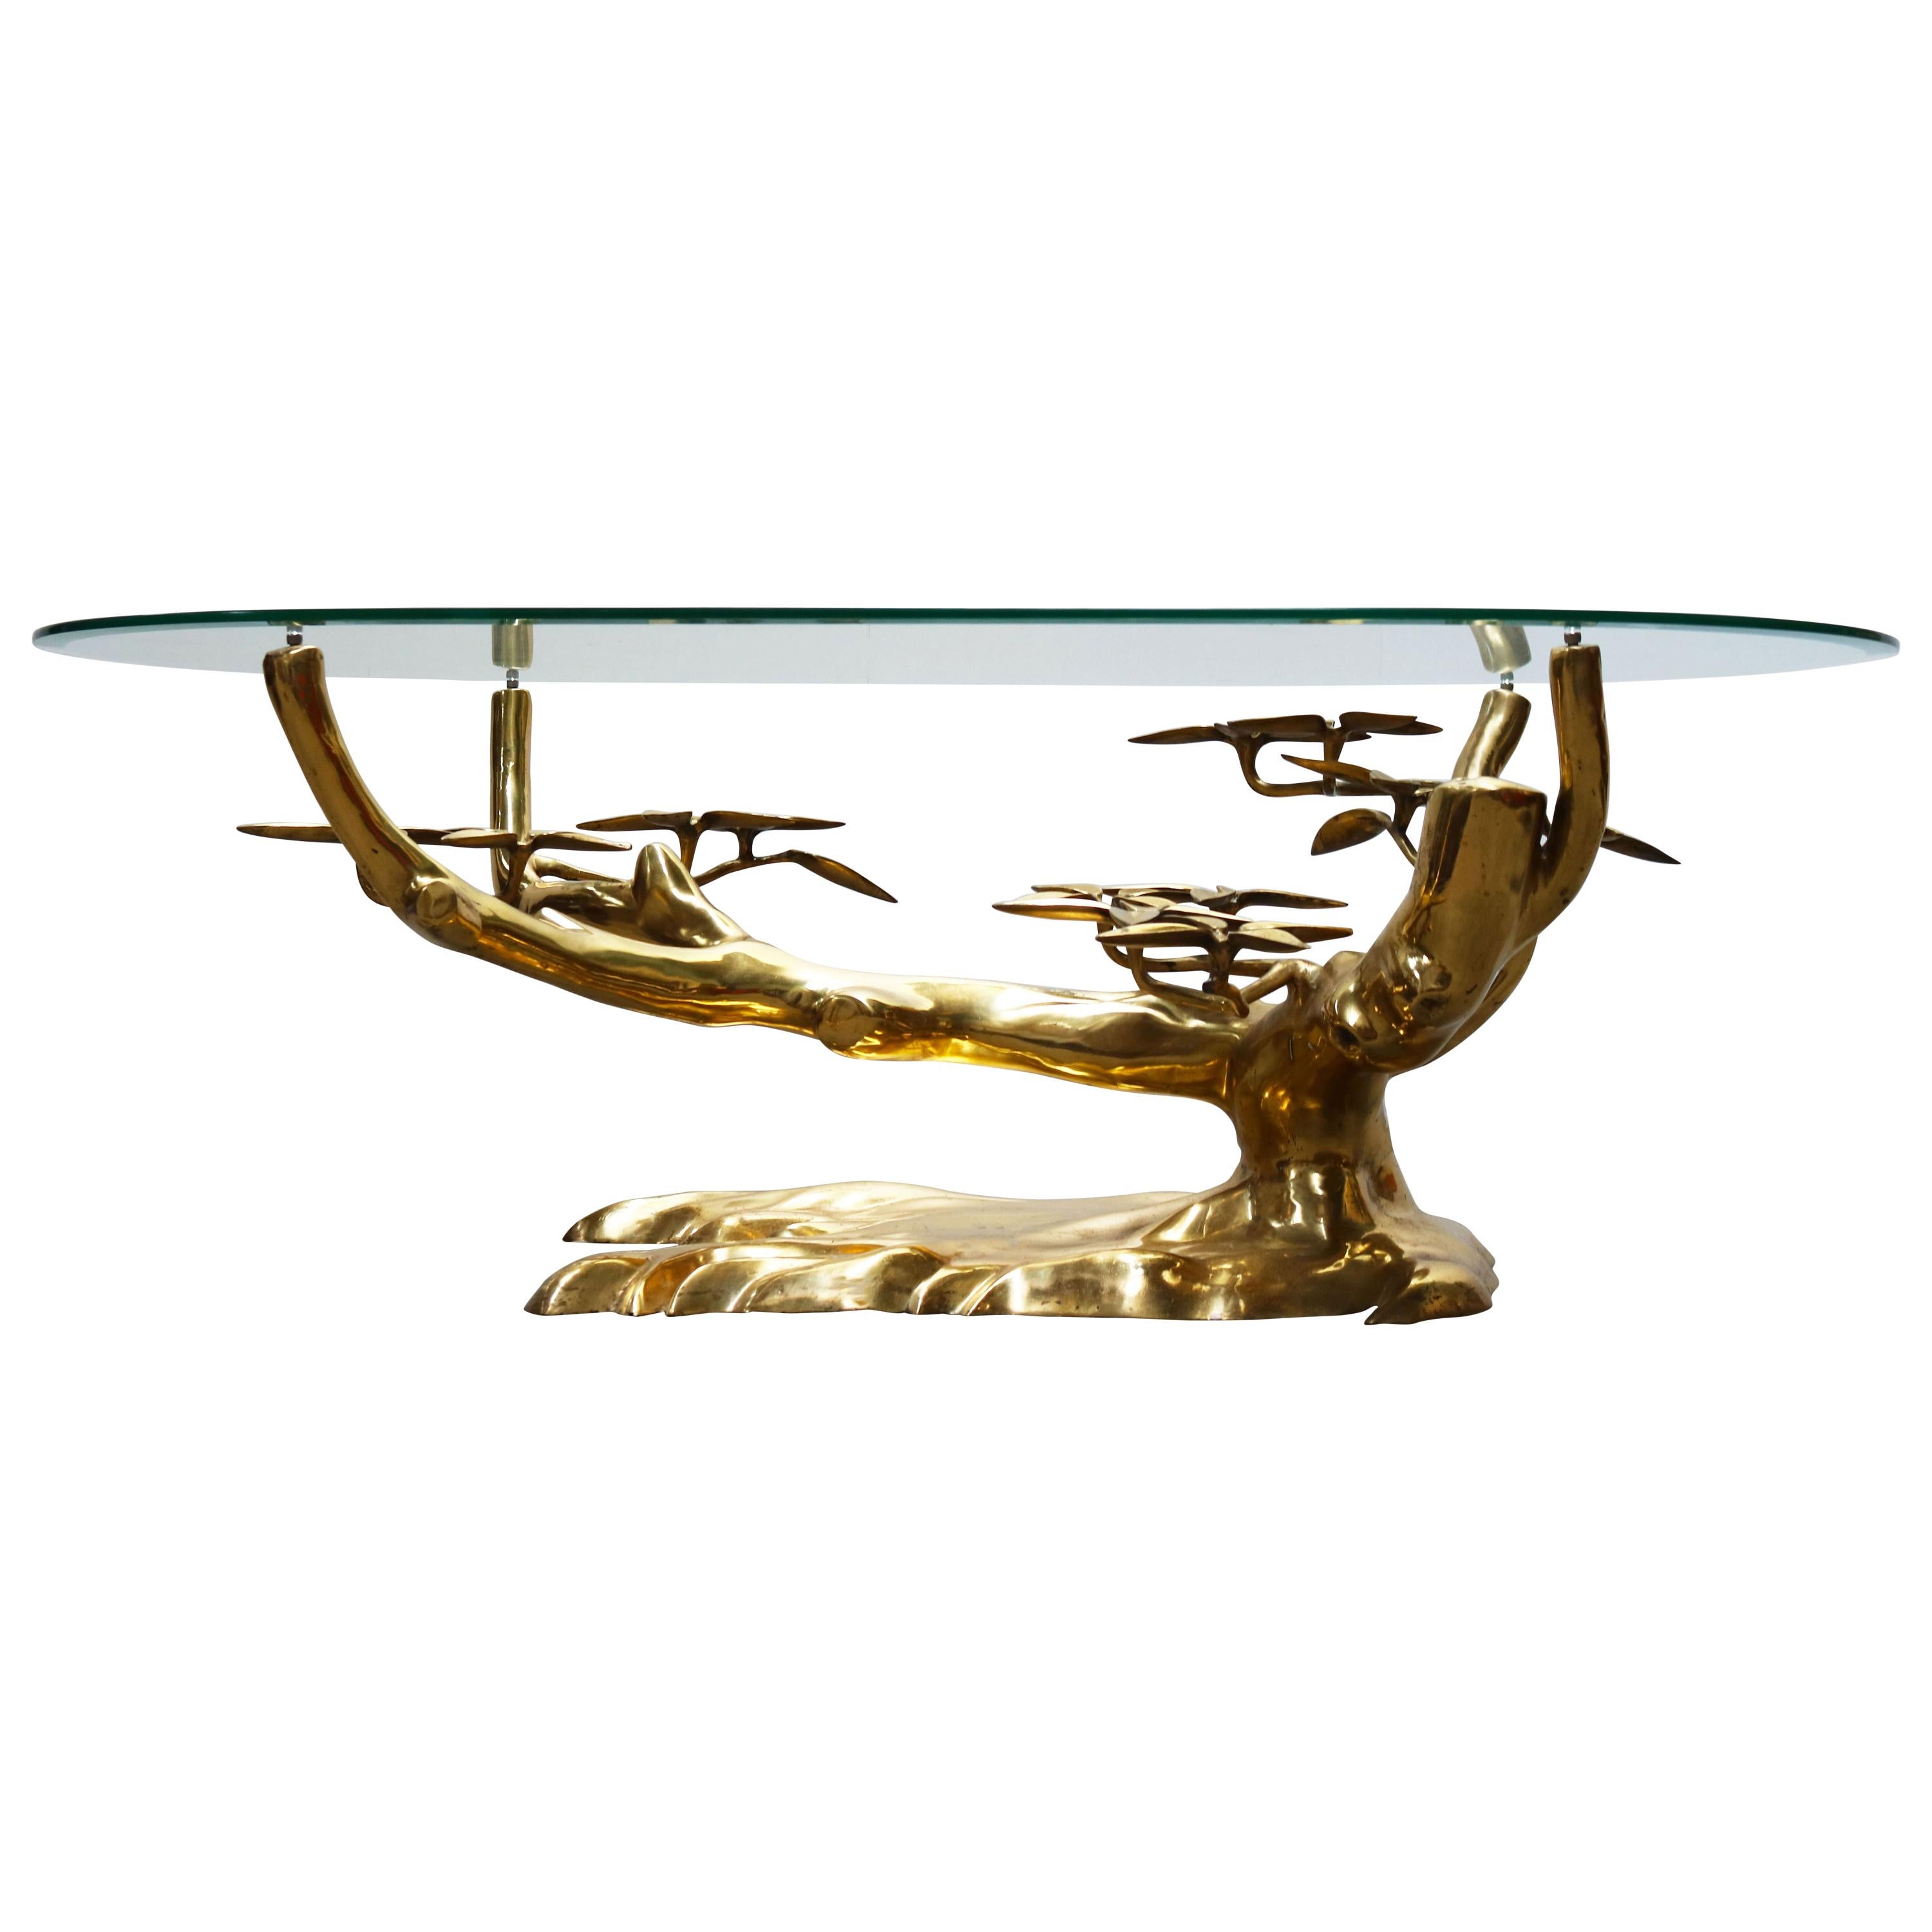 Rare ''Bonsai'' Coffee Table in Brass by Willy Daro 1970s Belgium, Glass, Gold